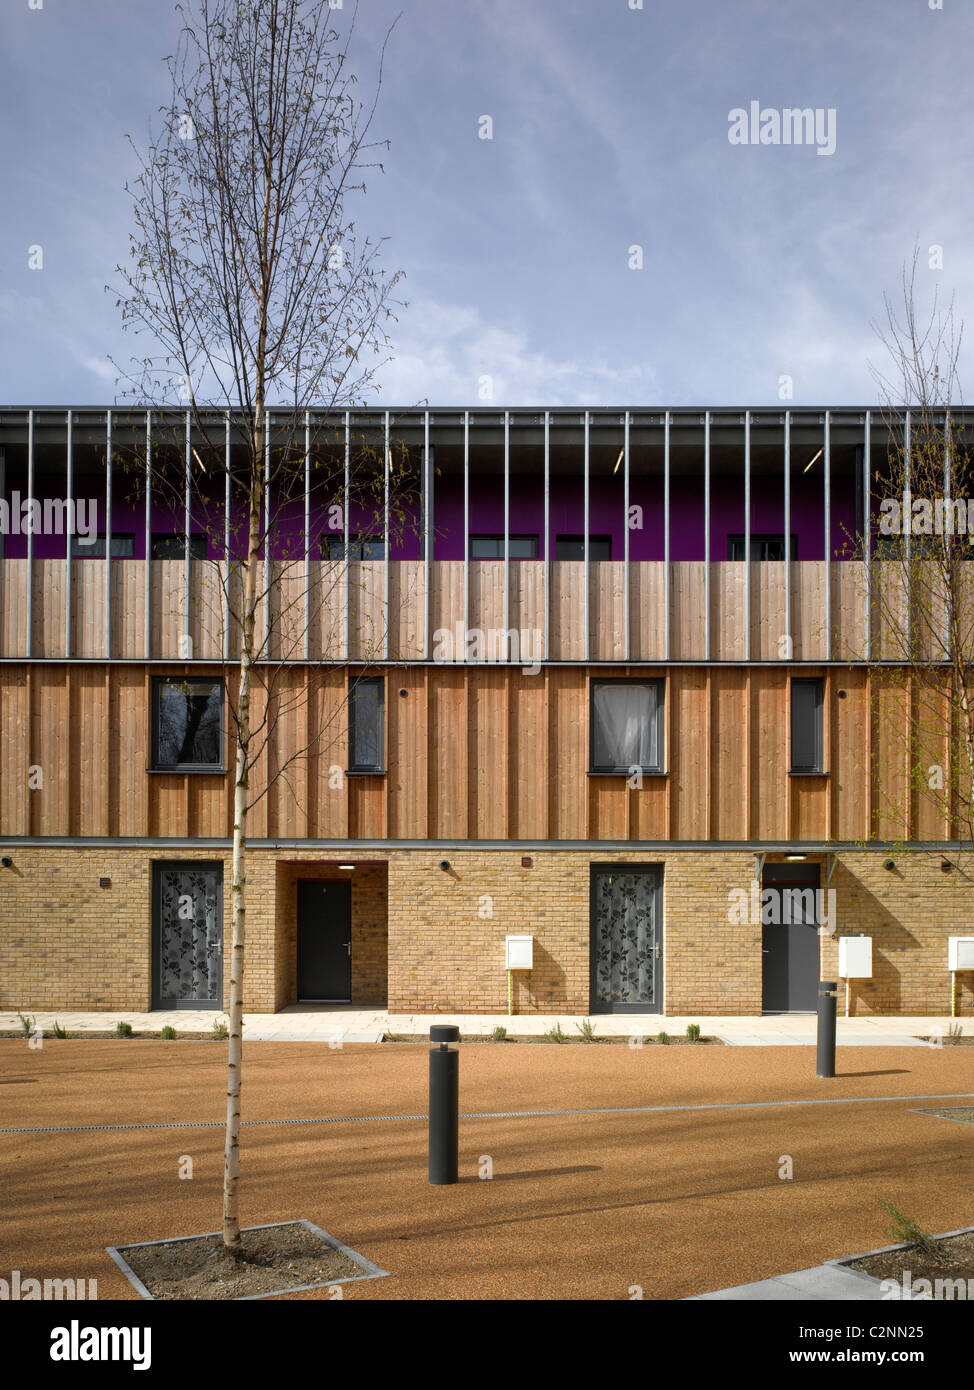 Heron Court, Thamesmead. Light steel frame with vertical thermowood cladding Stock Photo